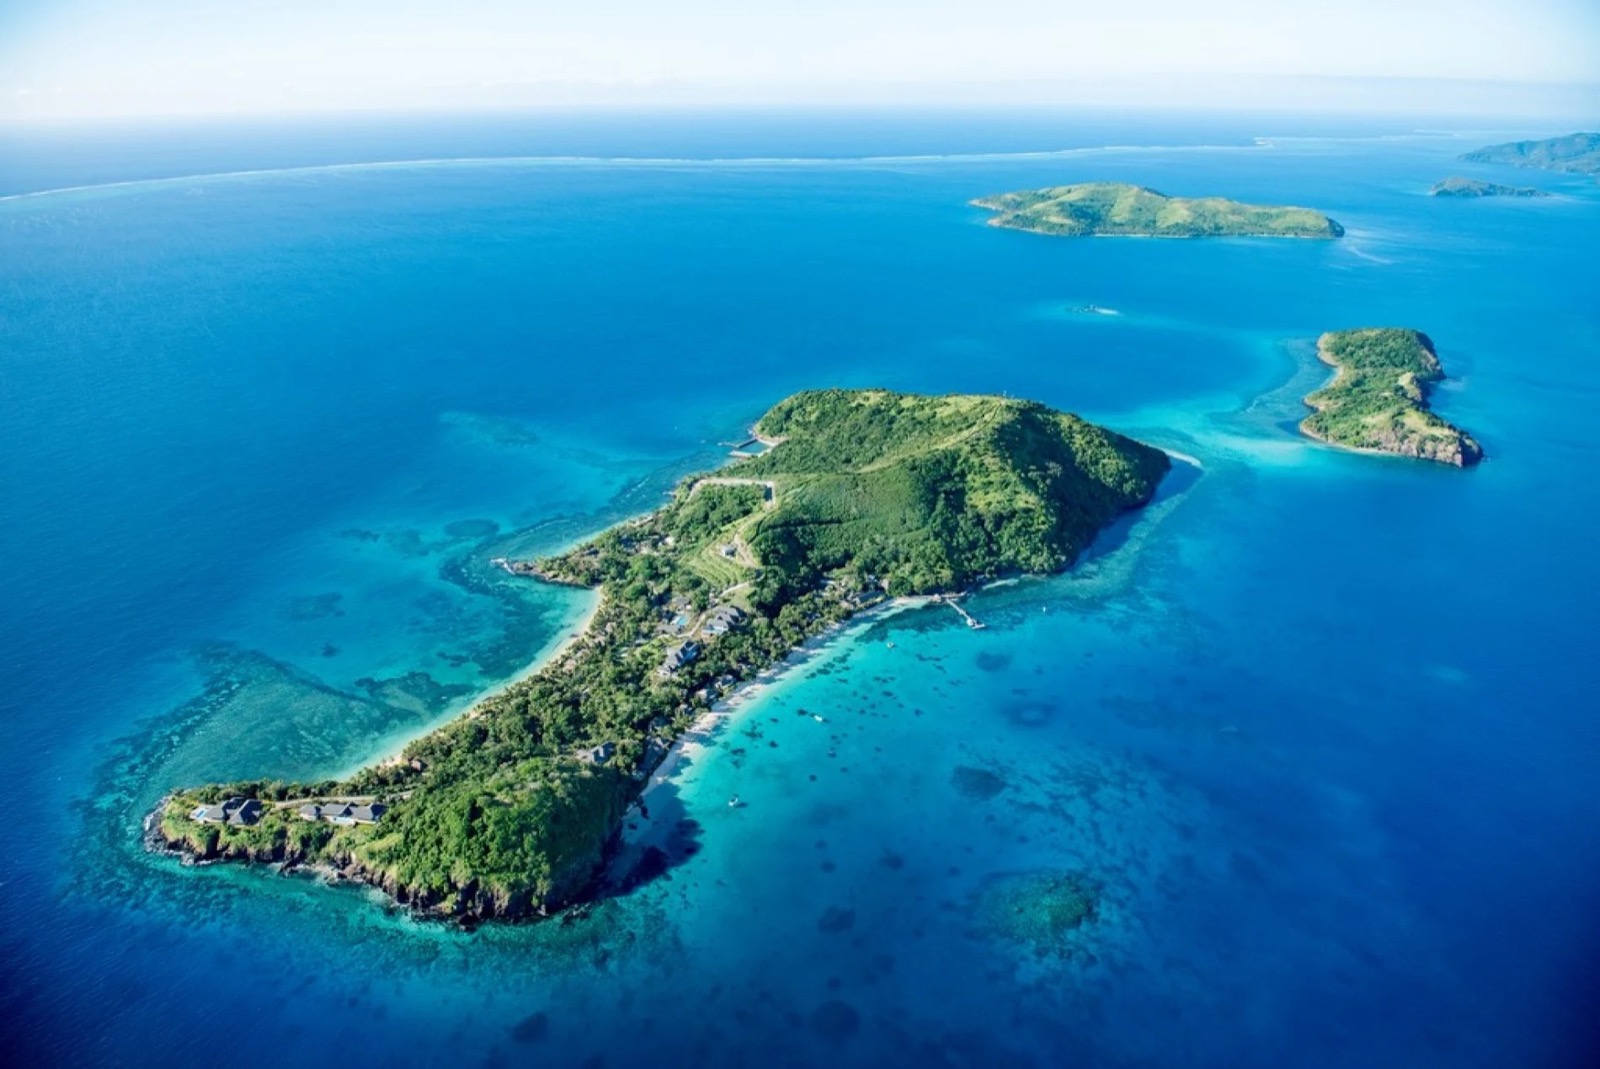 Wanna Know If You Have Enough General Knowledge? Take This Quiz to Find Out Kokomo Island, Fiji